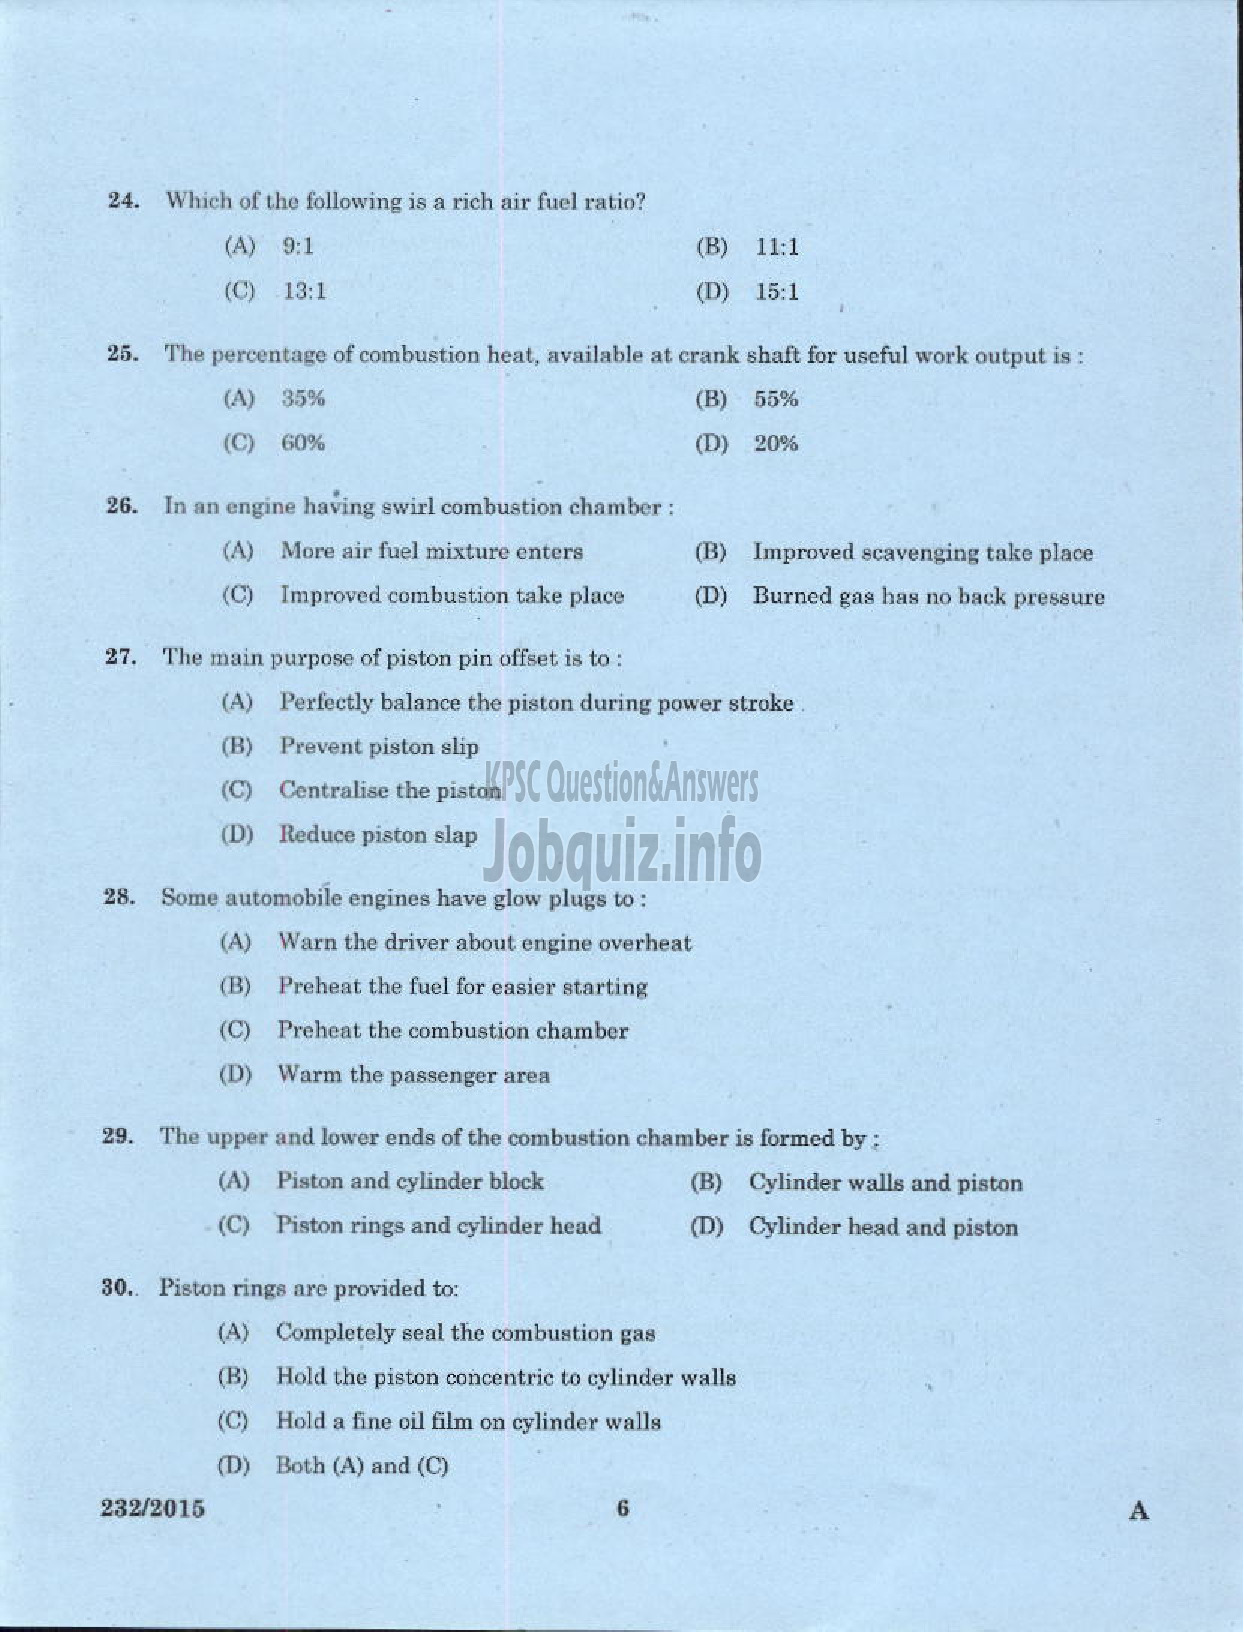 Kerala PSC Question Paper - MOTOR MECHANIC/STORE ASSISTANT GROUND WATER-4